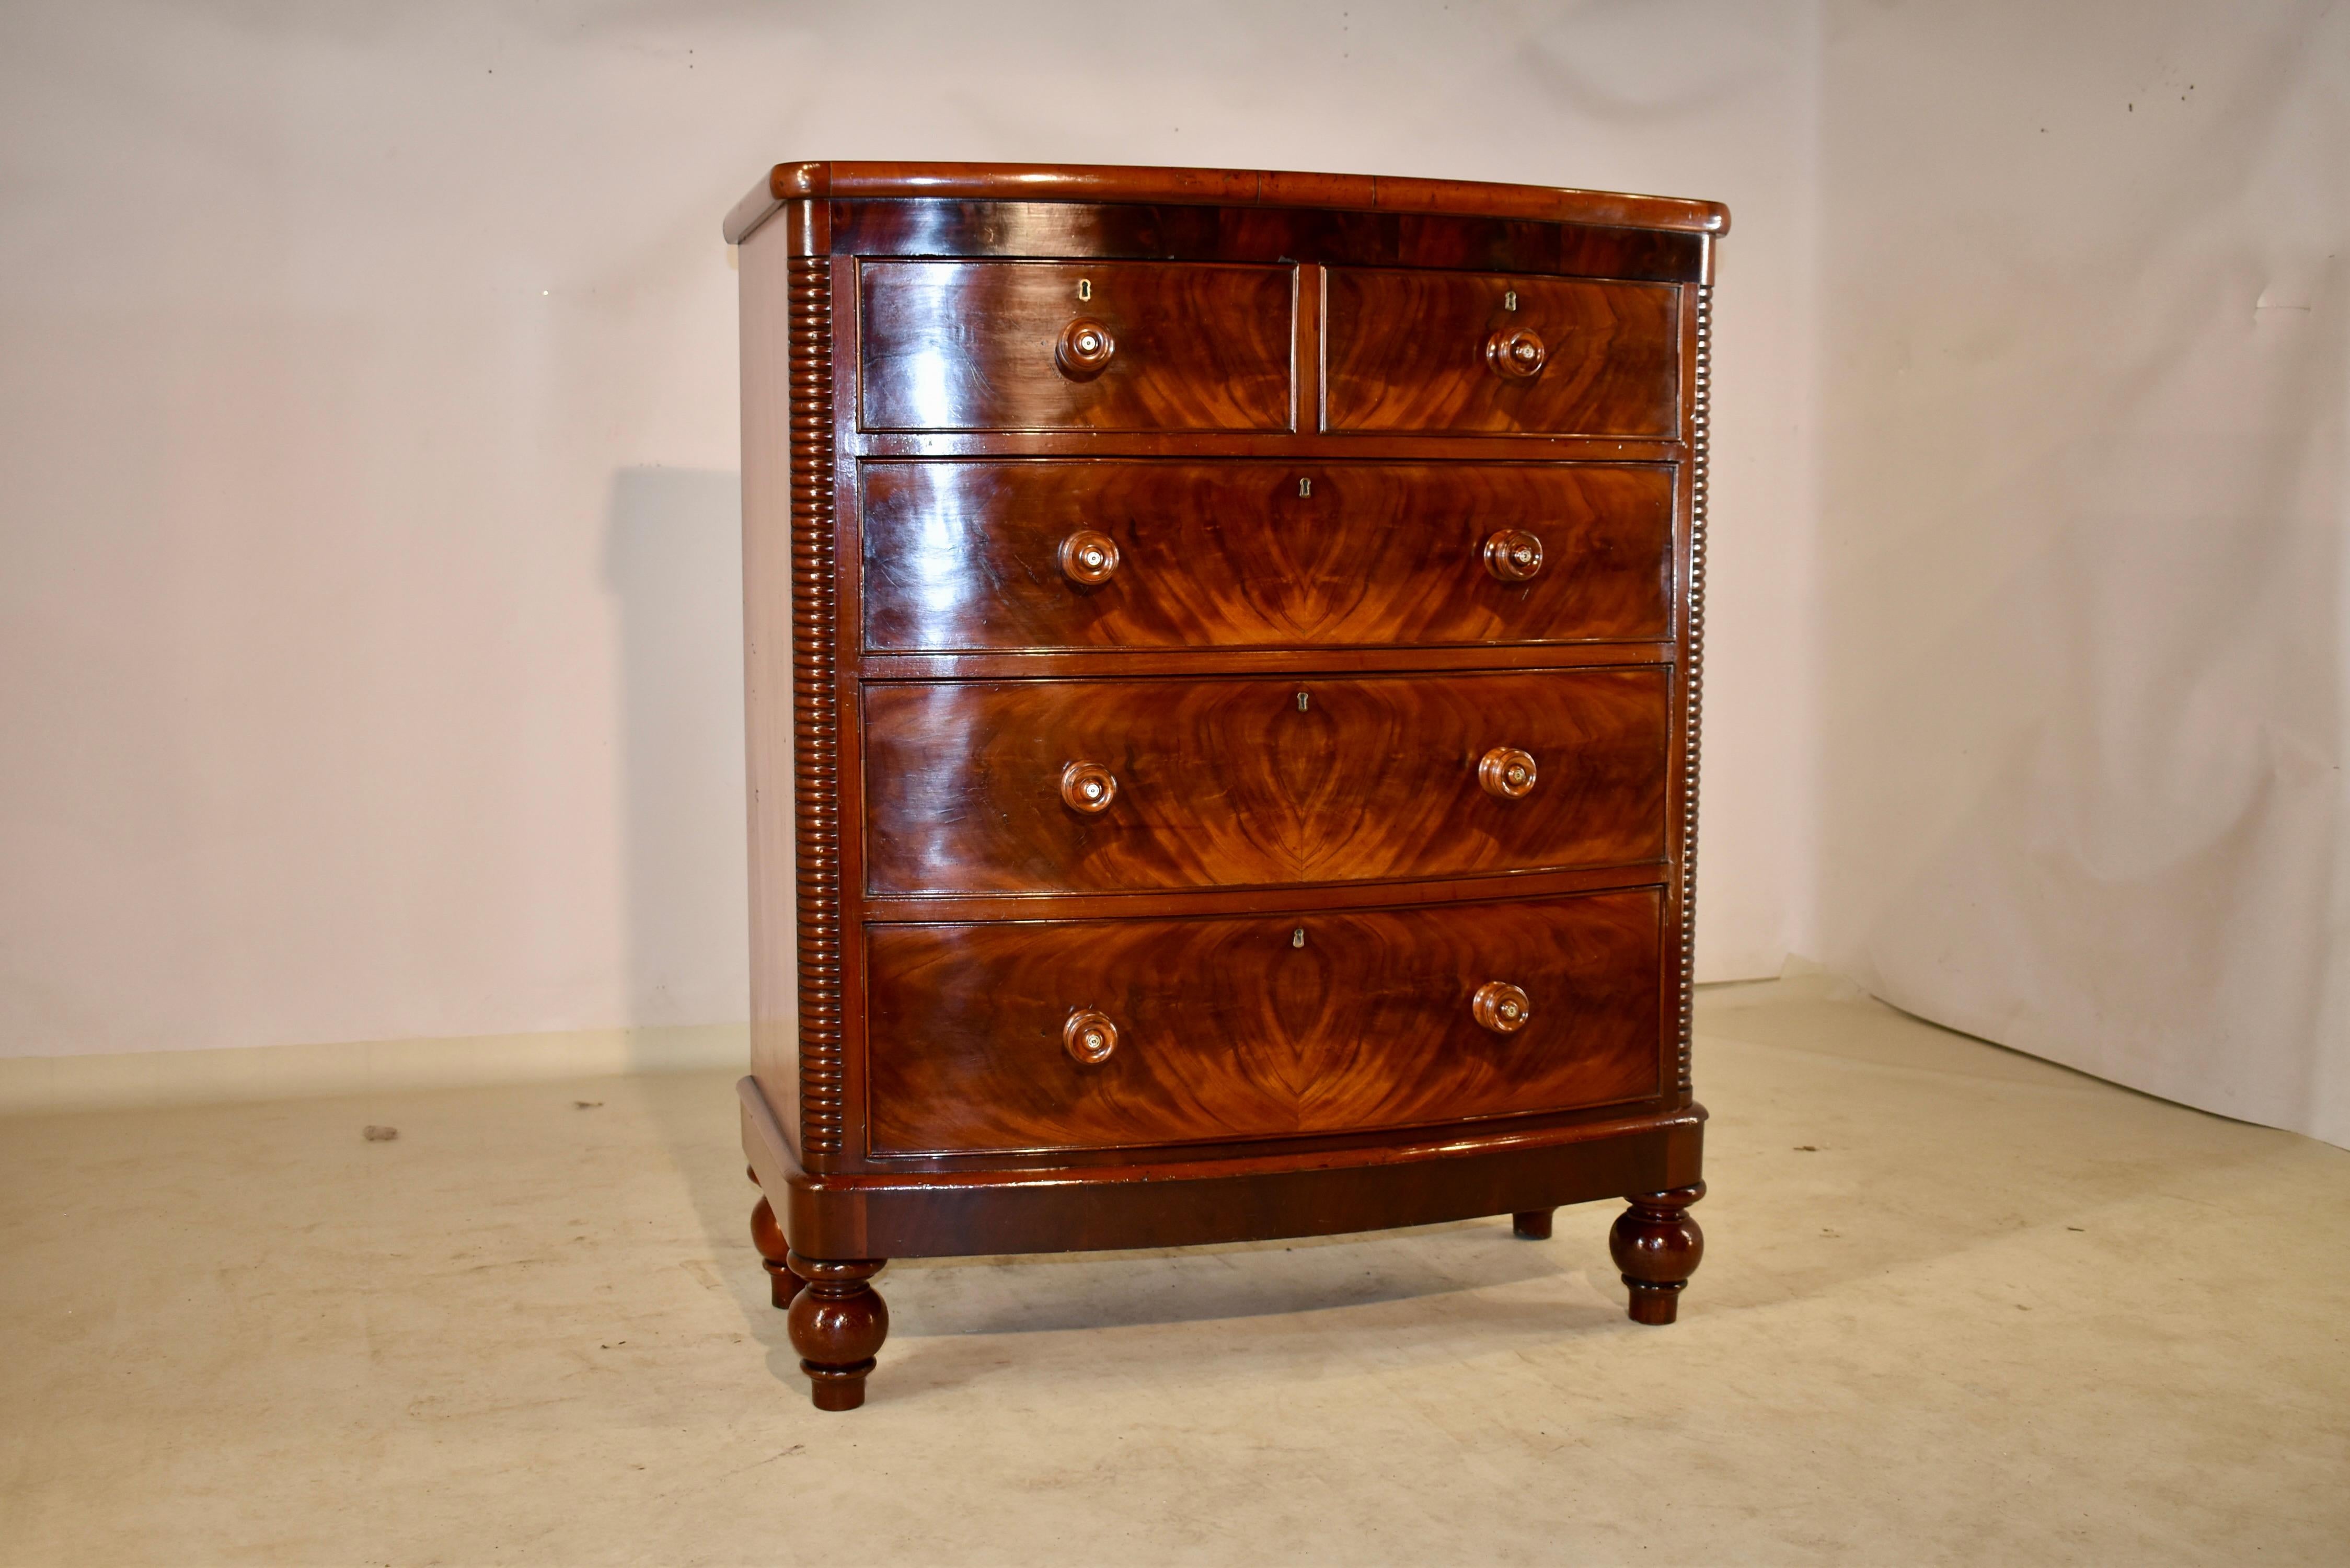 19th Century mahogany tall chest of drawers from England. The top is wonderfully grained and follows down to simple sides and two drawers over three drawers in the front. The drawer fronts are beaded and are made from flame mahogany for a wonderful